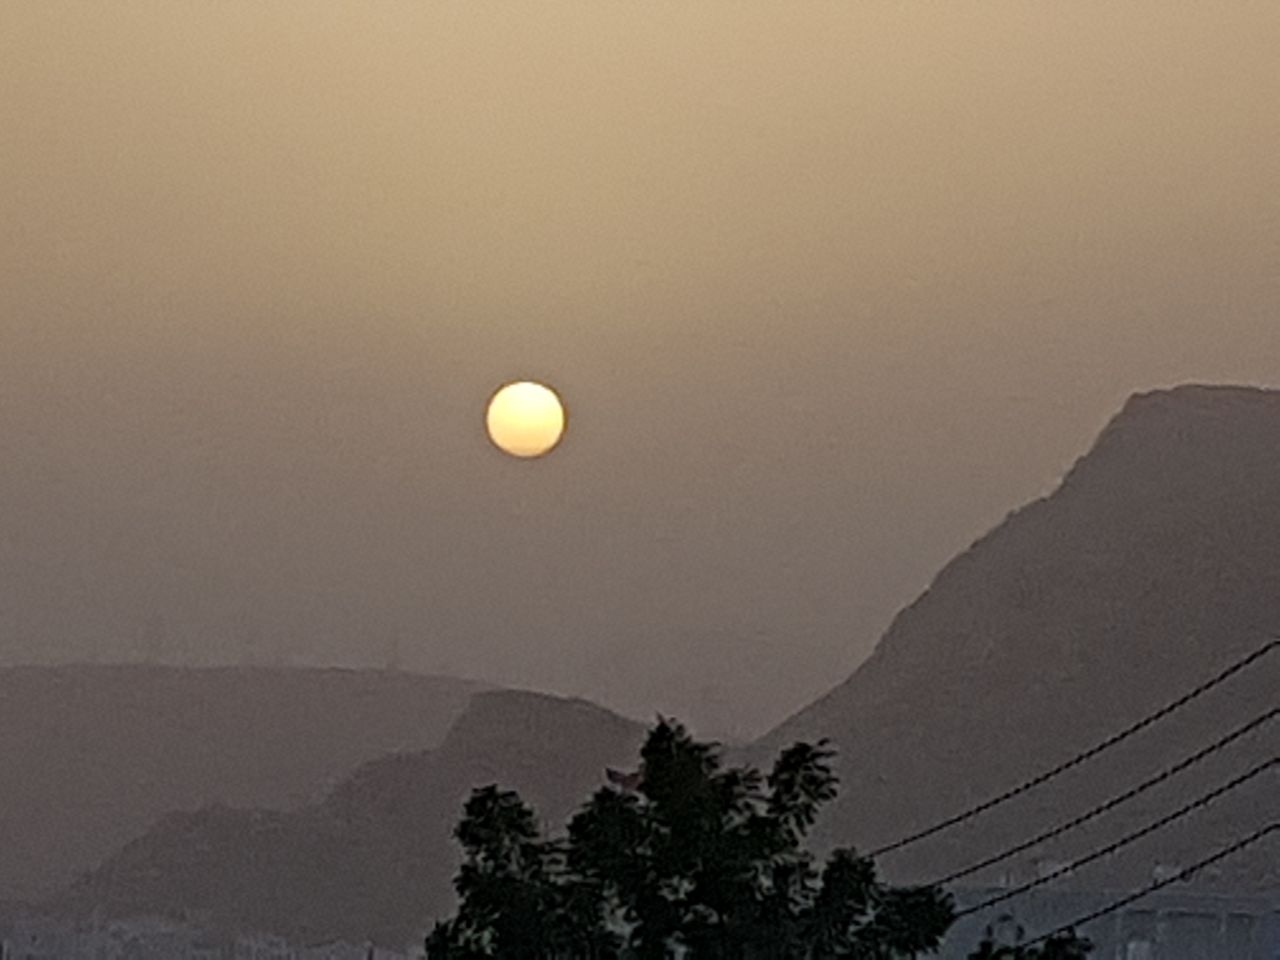 In pictures: Dusty weather condition in Muscat